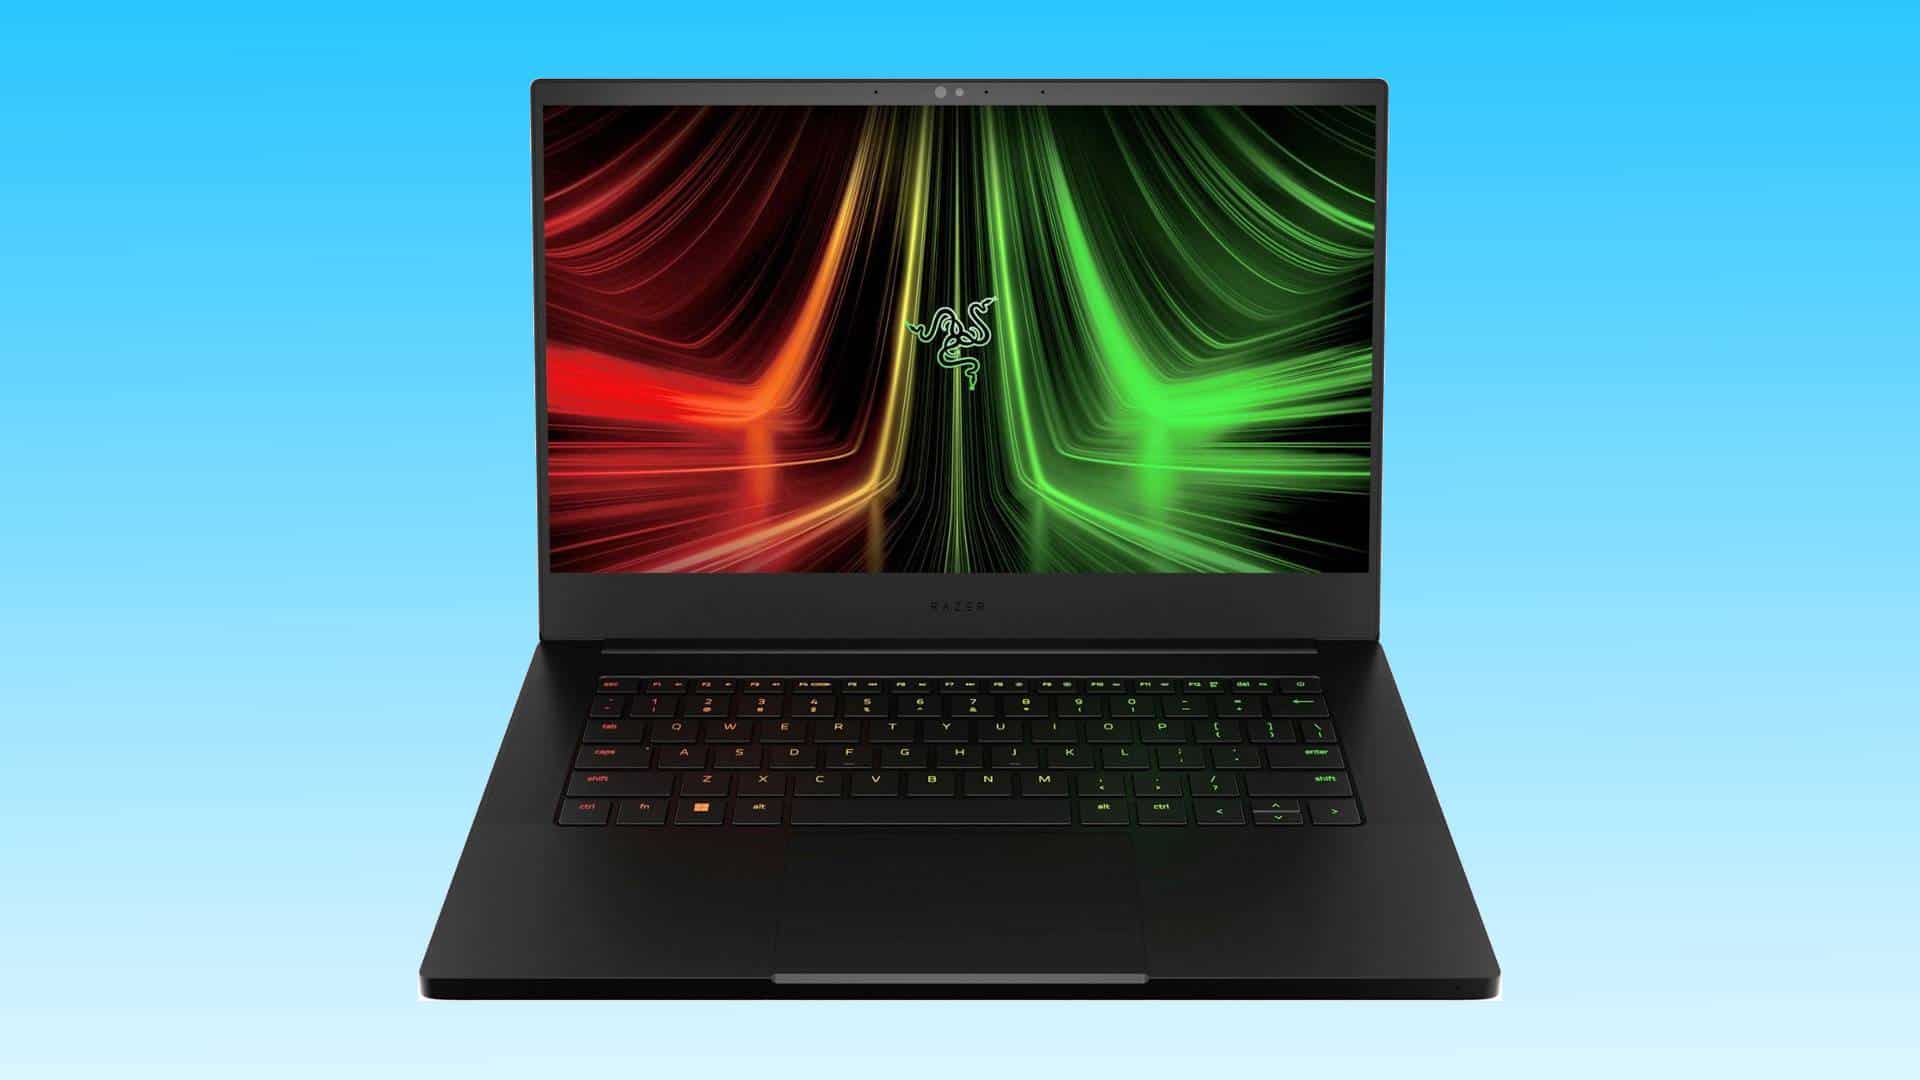 A Razer RTX 3070 Ti gaming laptop opened and displaying a vibrant green and red abstract wallpaper, set against a blue gradient background.